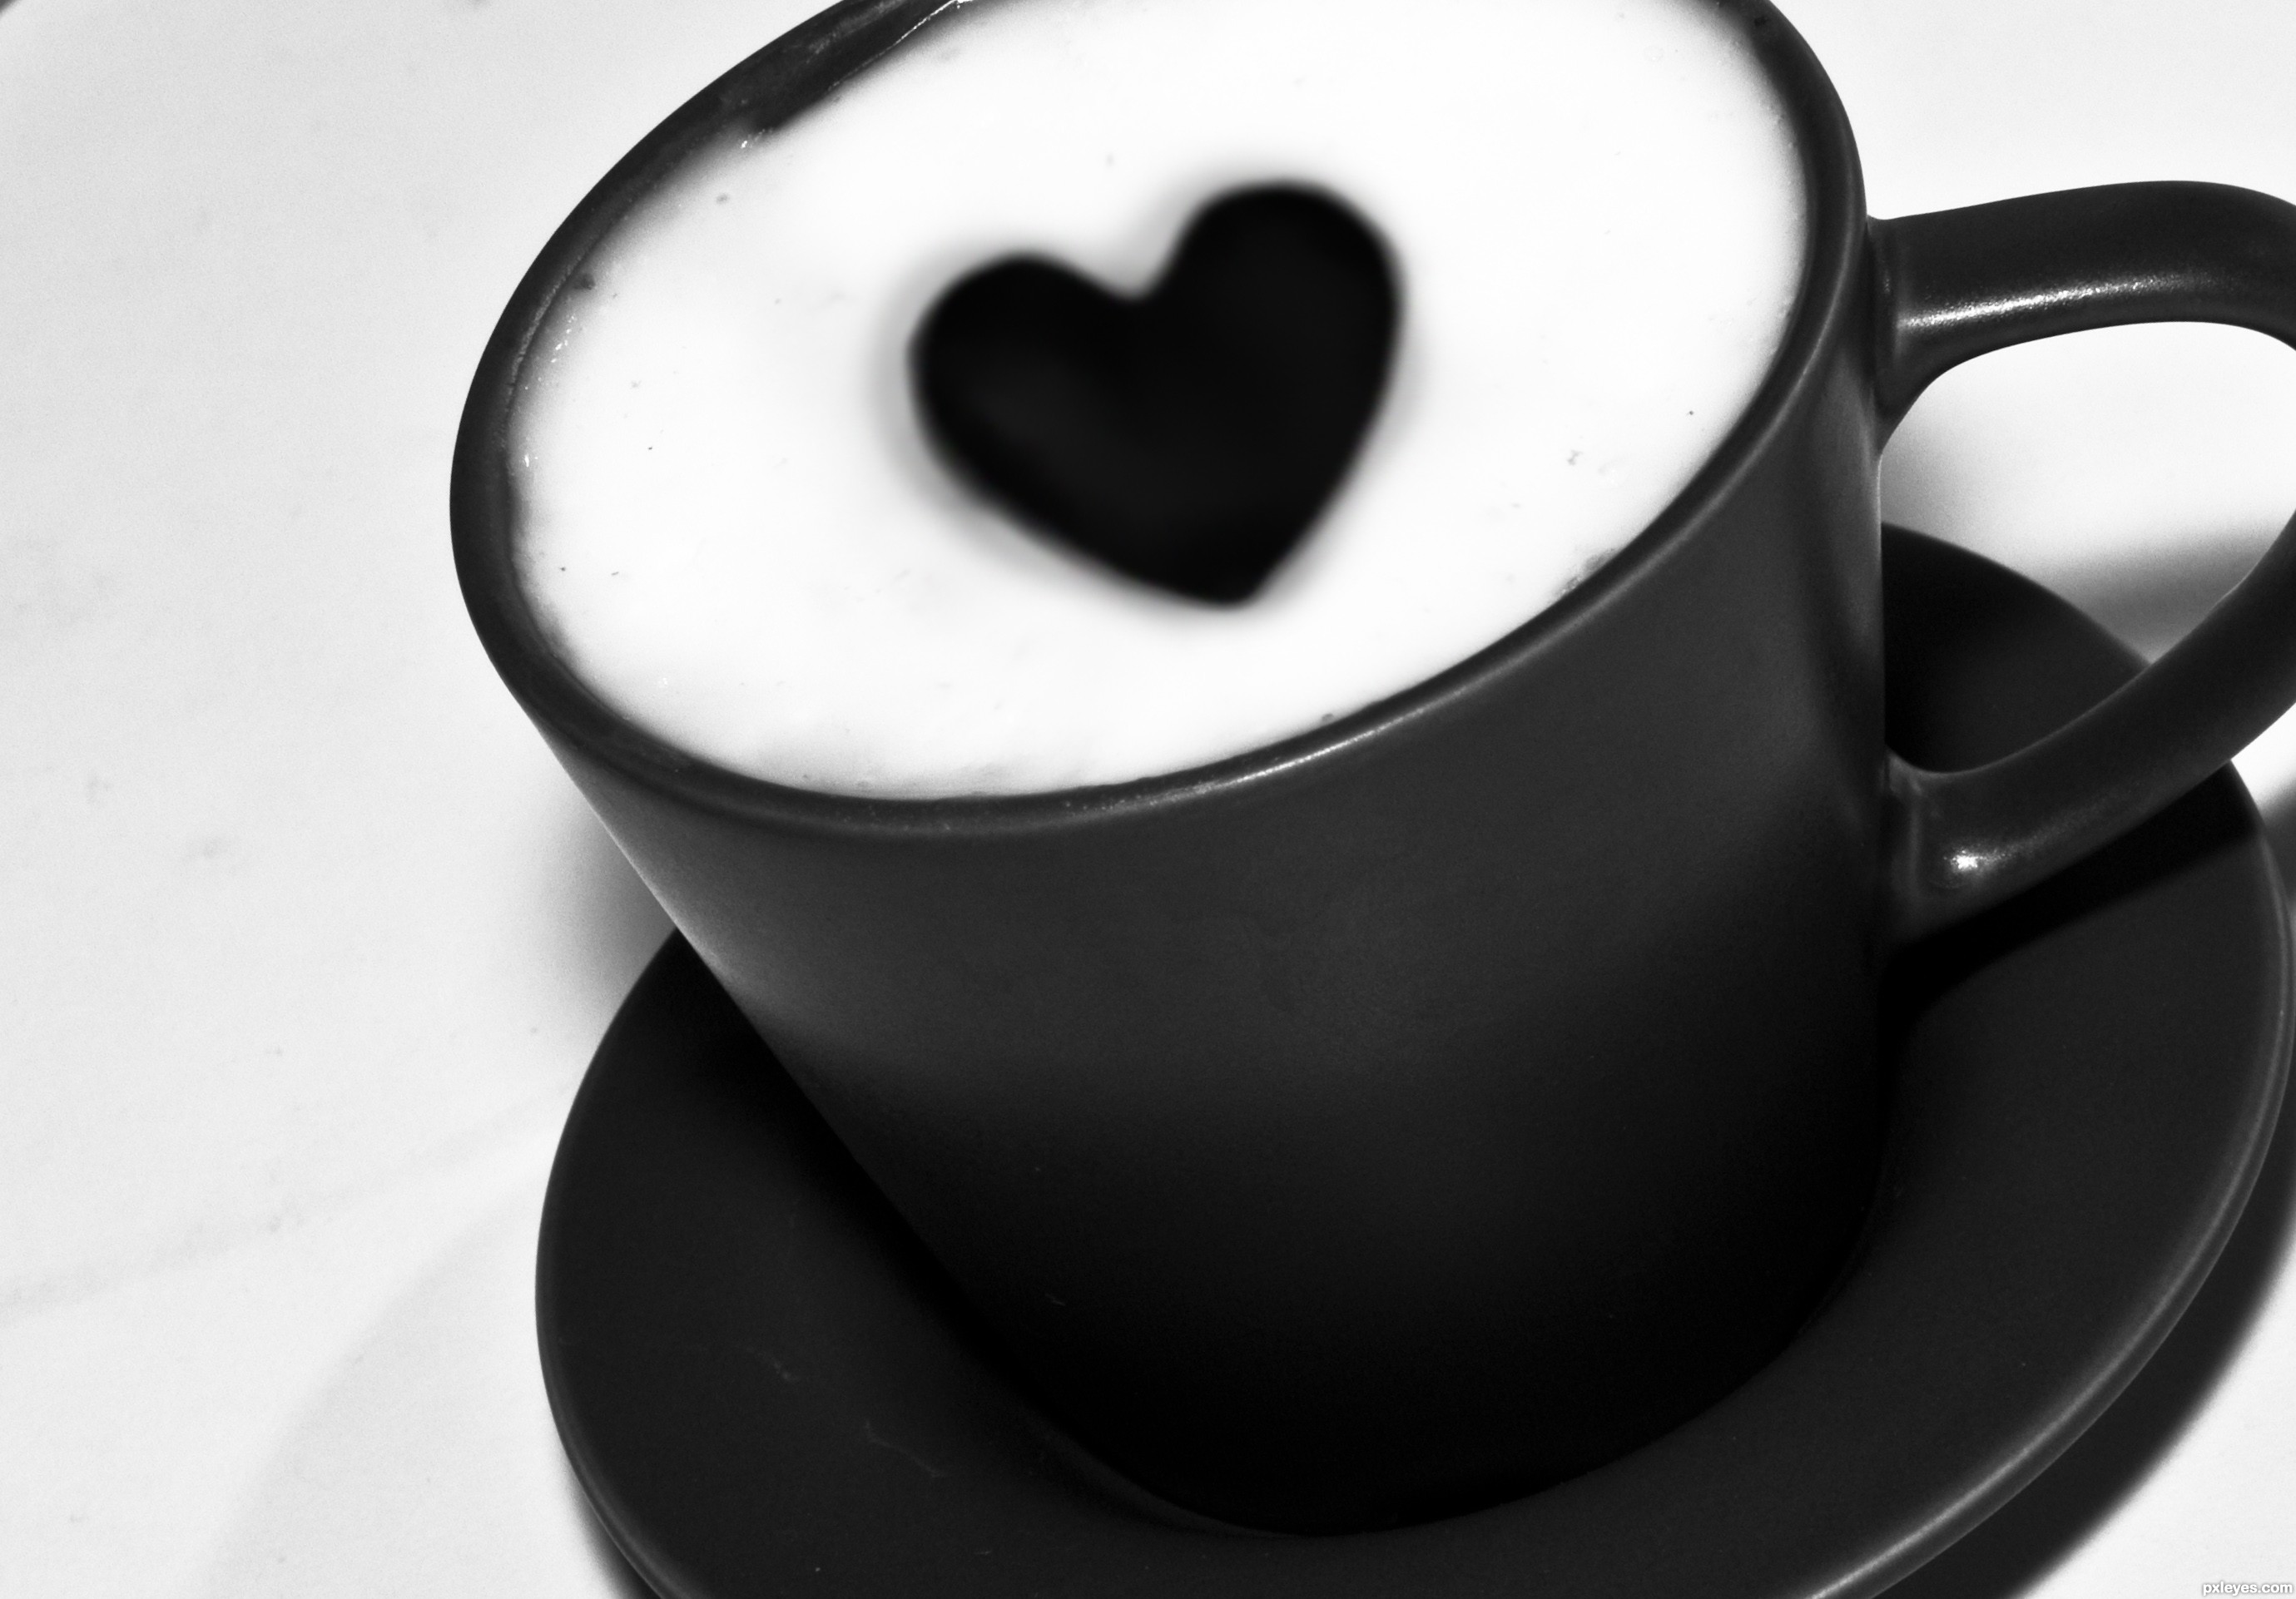 Love Coffee picture, by locksmagic for: coffee figures photography 